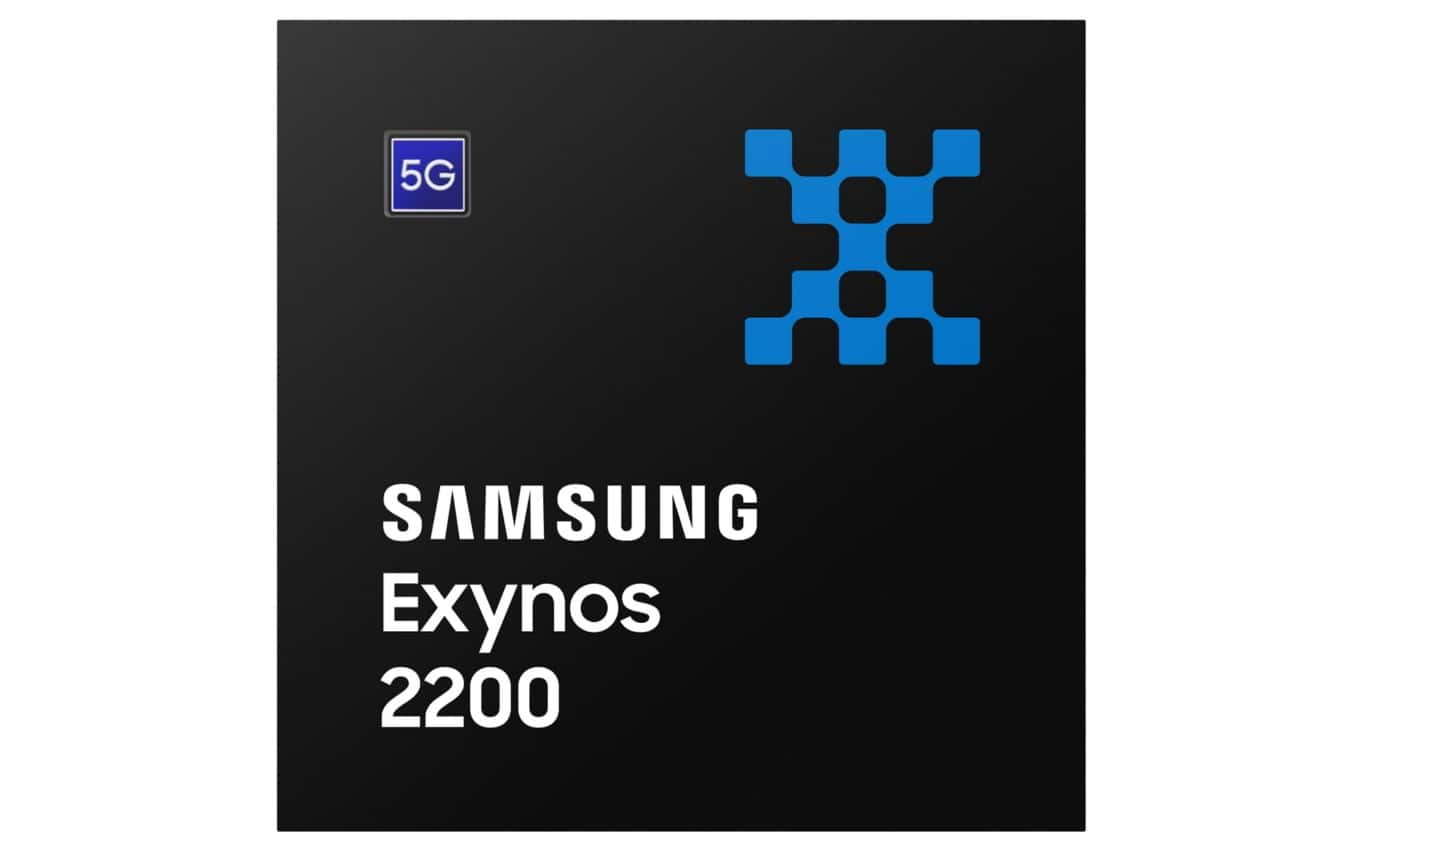 Samsung finally announces Exynos 2200 processor with the new AMD-based Xclipse GPU